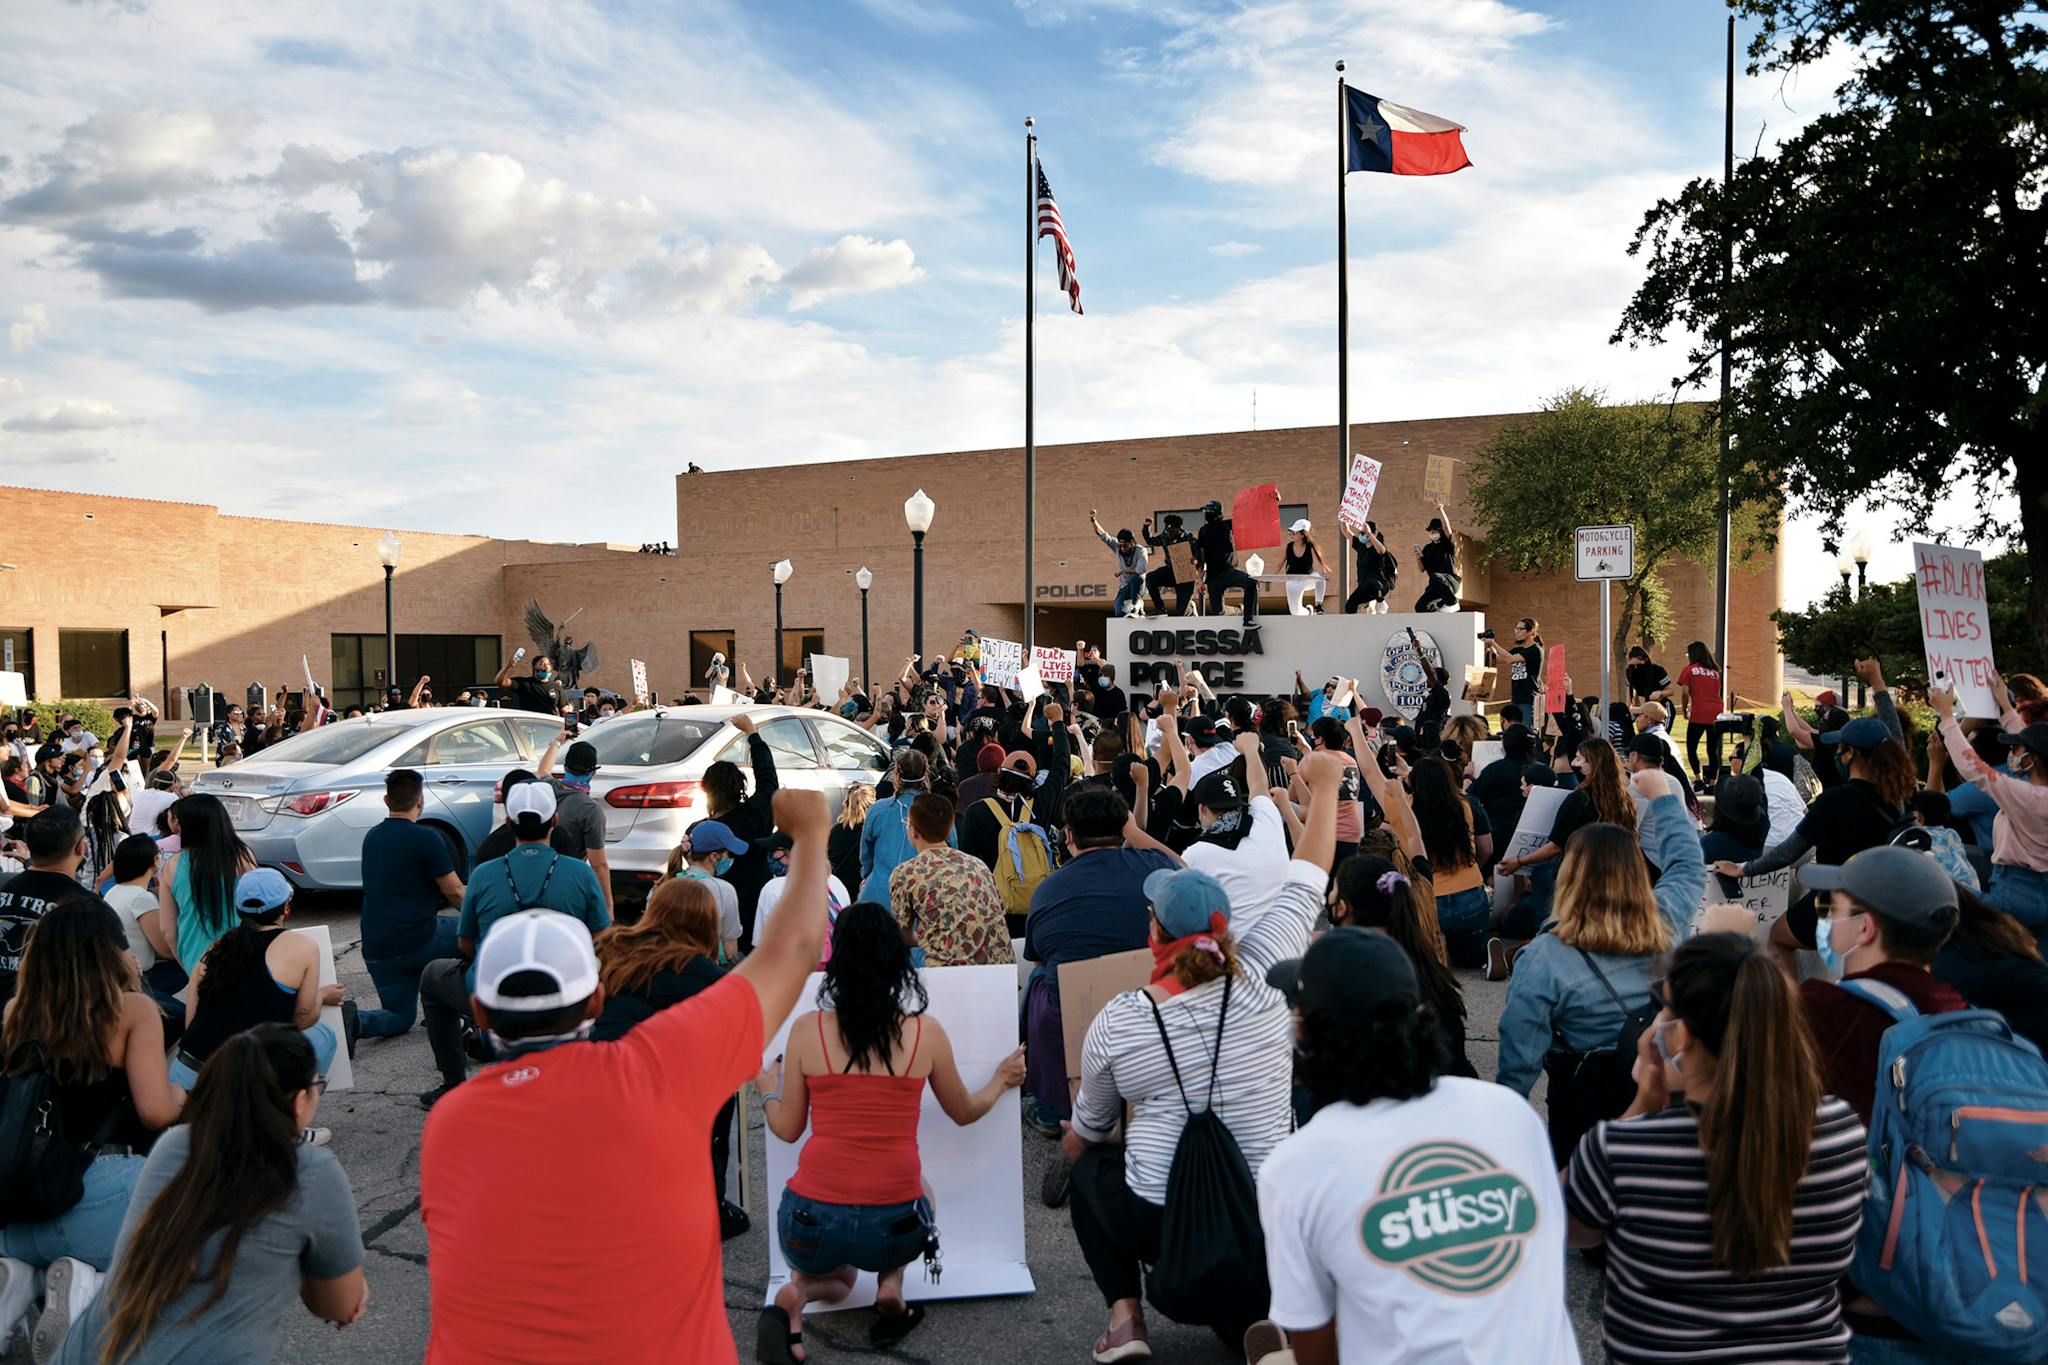 Protesters take a knee outside of the Odessa Police Department during a Black Lives Matter protest in Odessa on May 31, 2020, following the death of George Floyd on May 25.